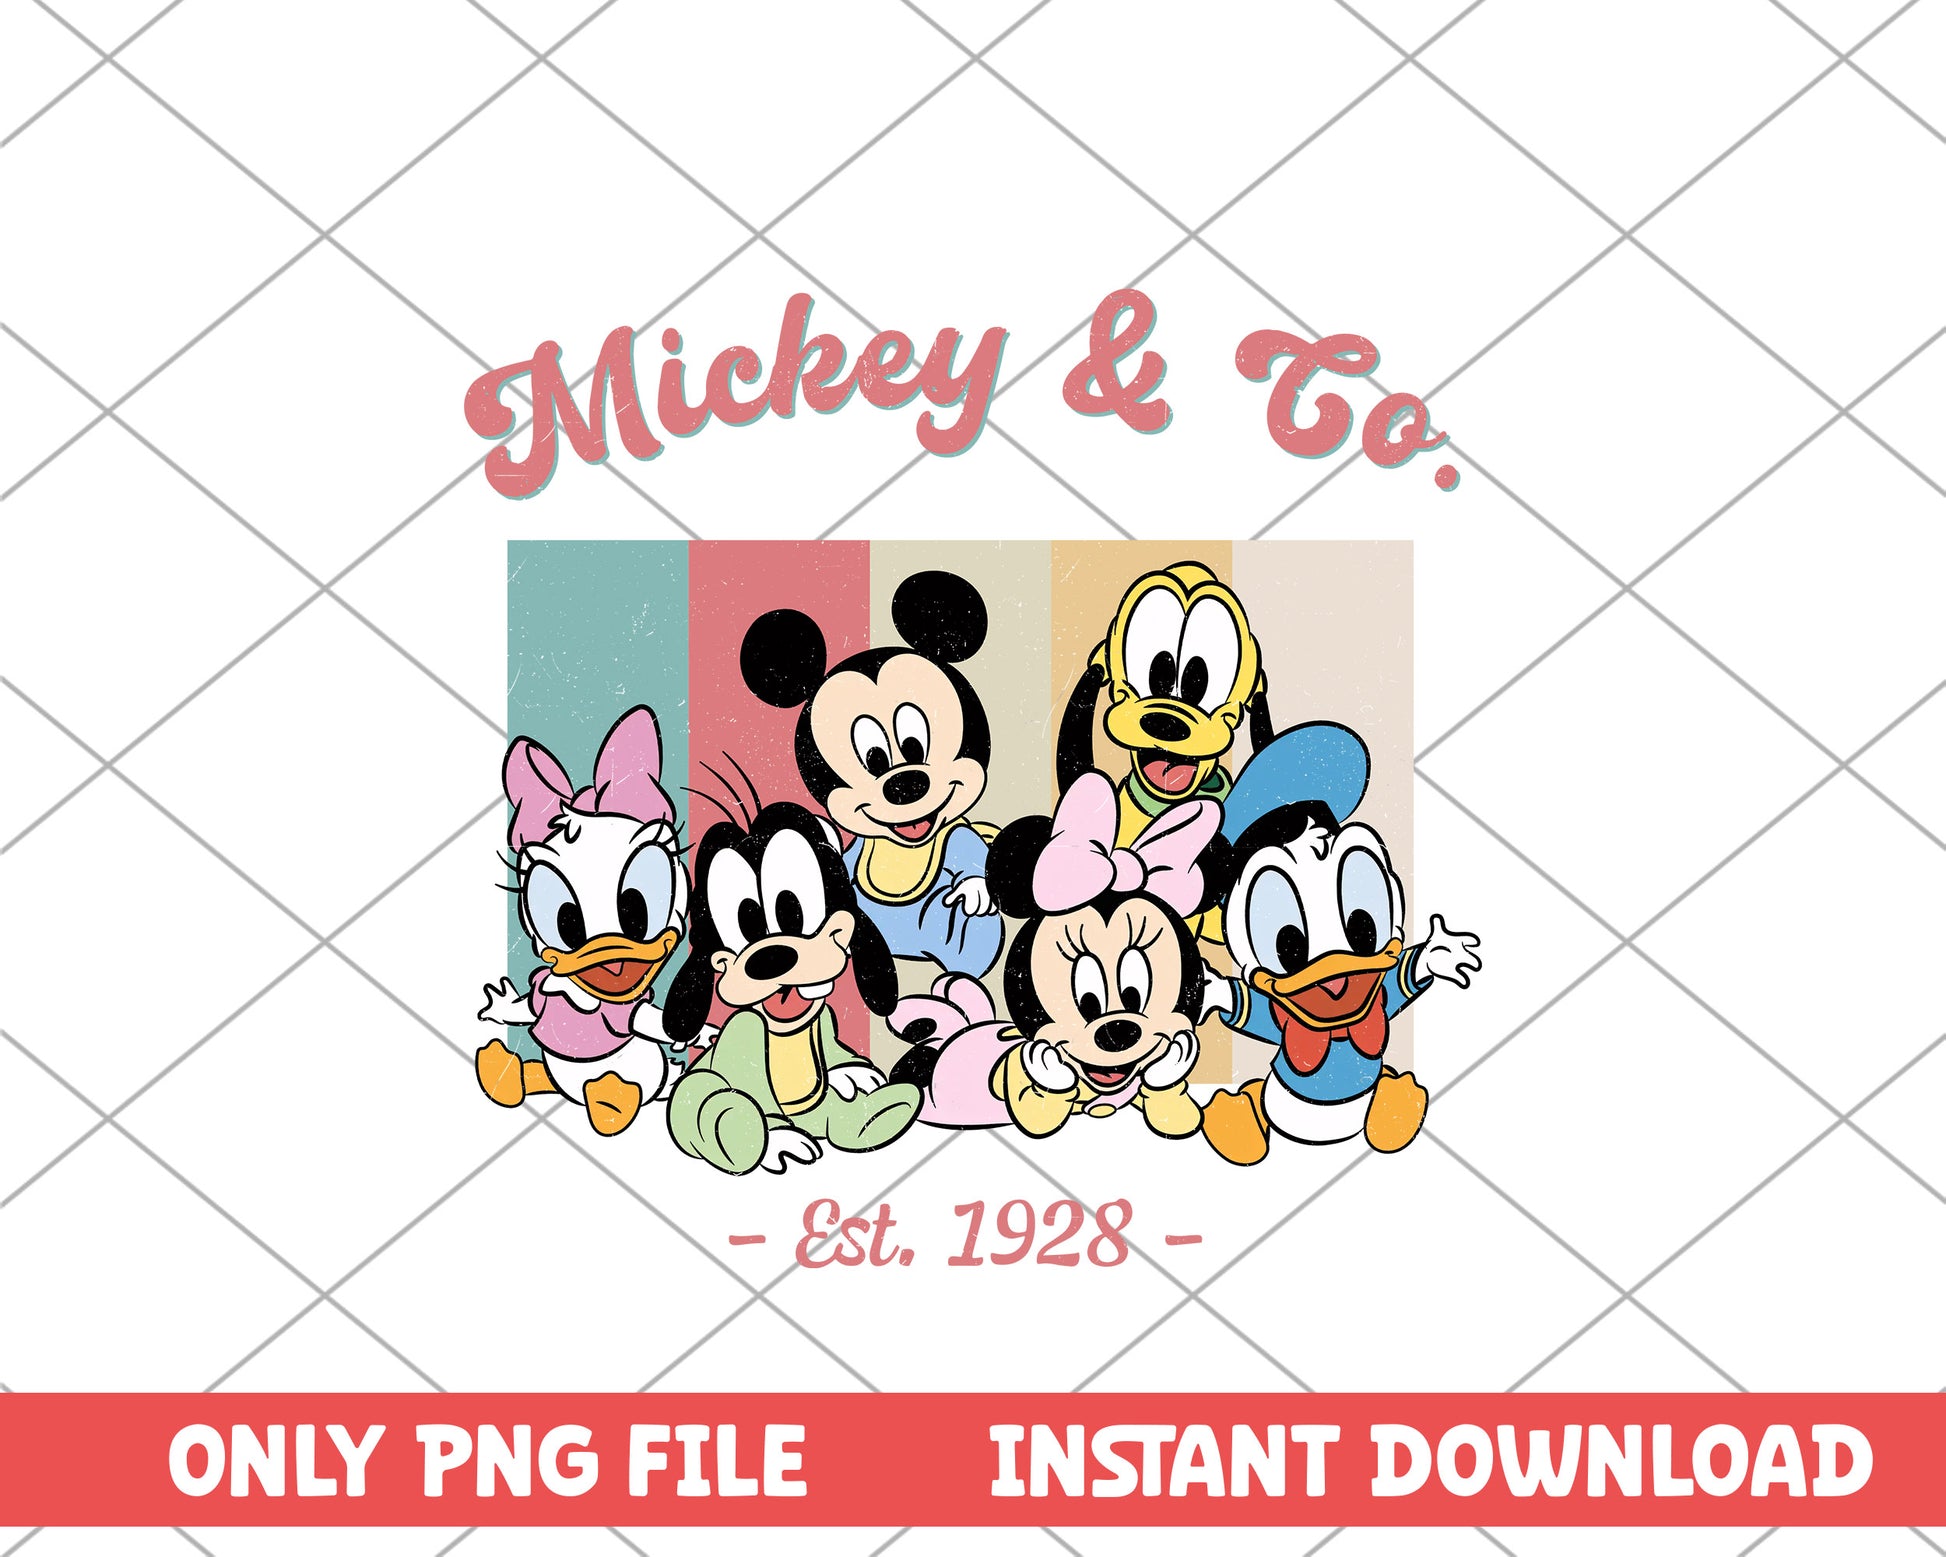 Mickey mouse baby mickey & co disney png 